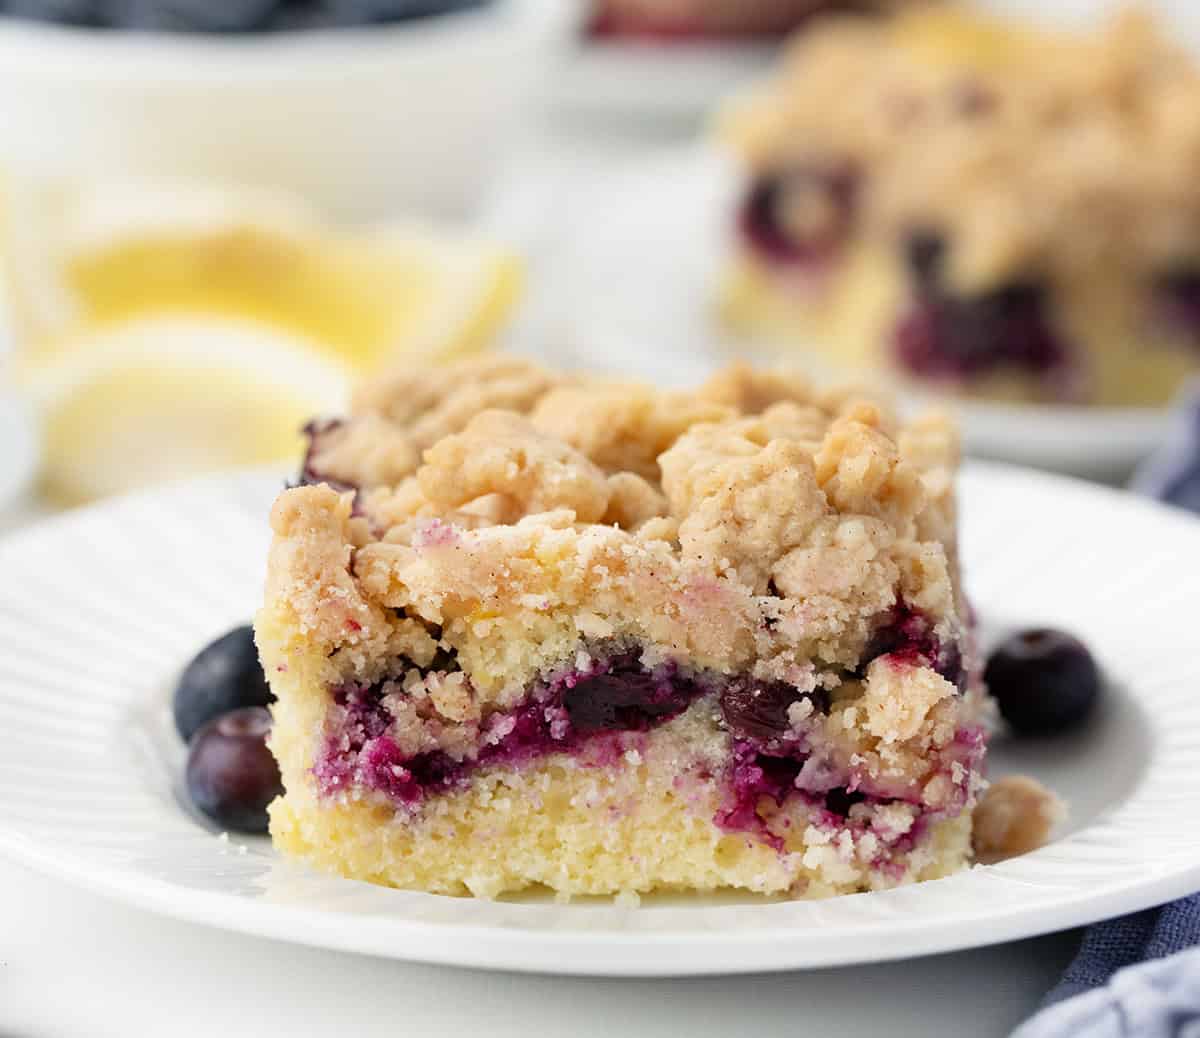 Piece of Blueberry Lemon Crumb Cake on a white plate showing crumb and blueberries.